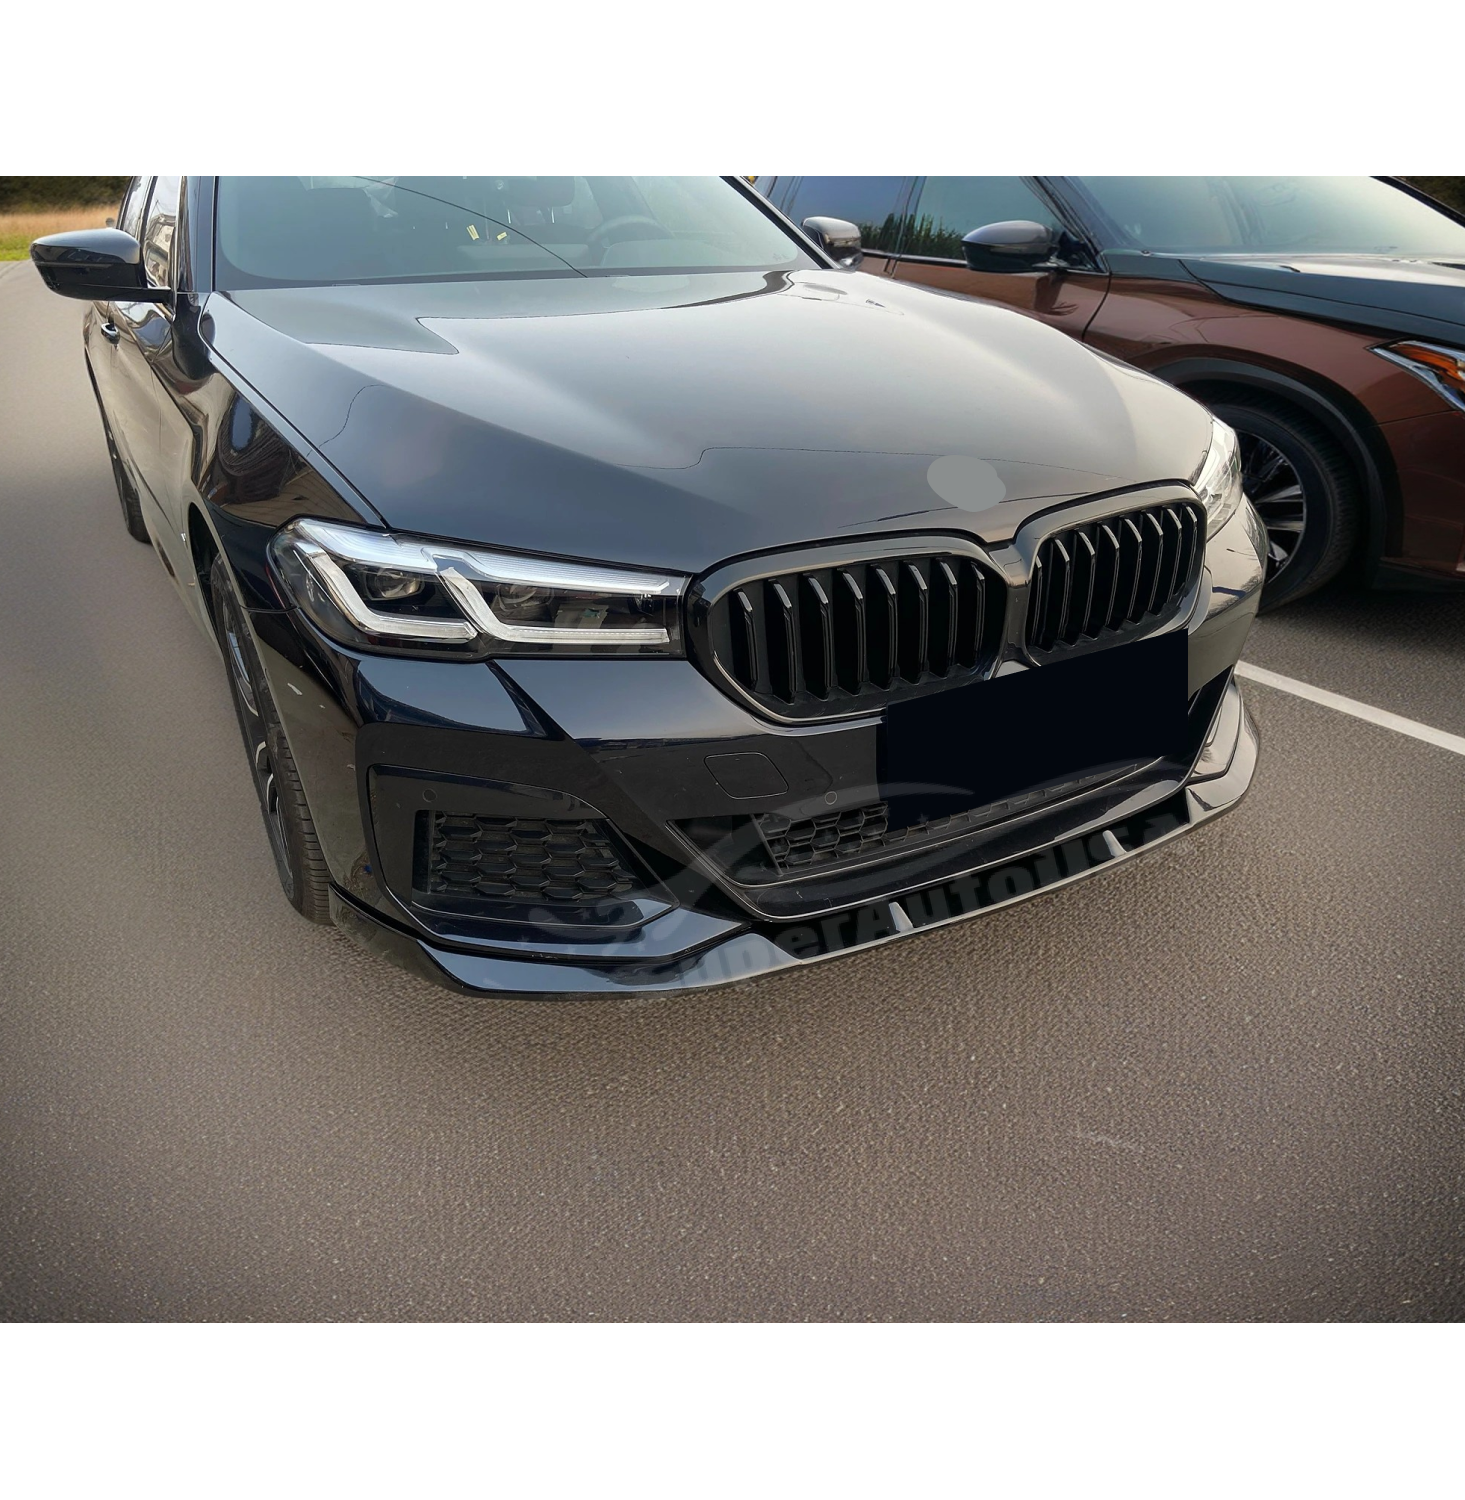 Close-up of the Fit 2021-2024 BMW 5 Series G30 Gloss Black Front Bumper Lip Spoiler, emphasizing the front spoiler lip splitter's sleek design.